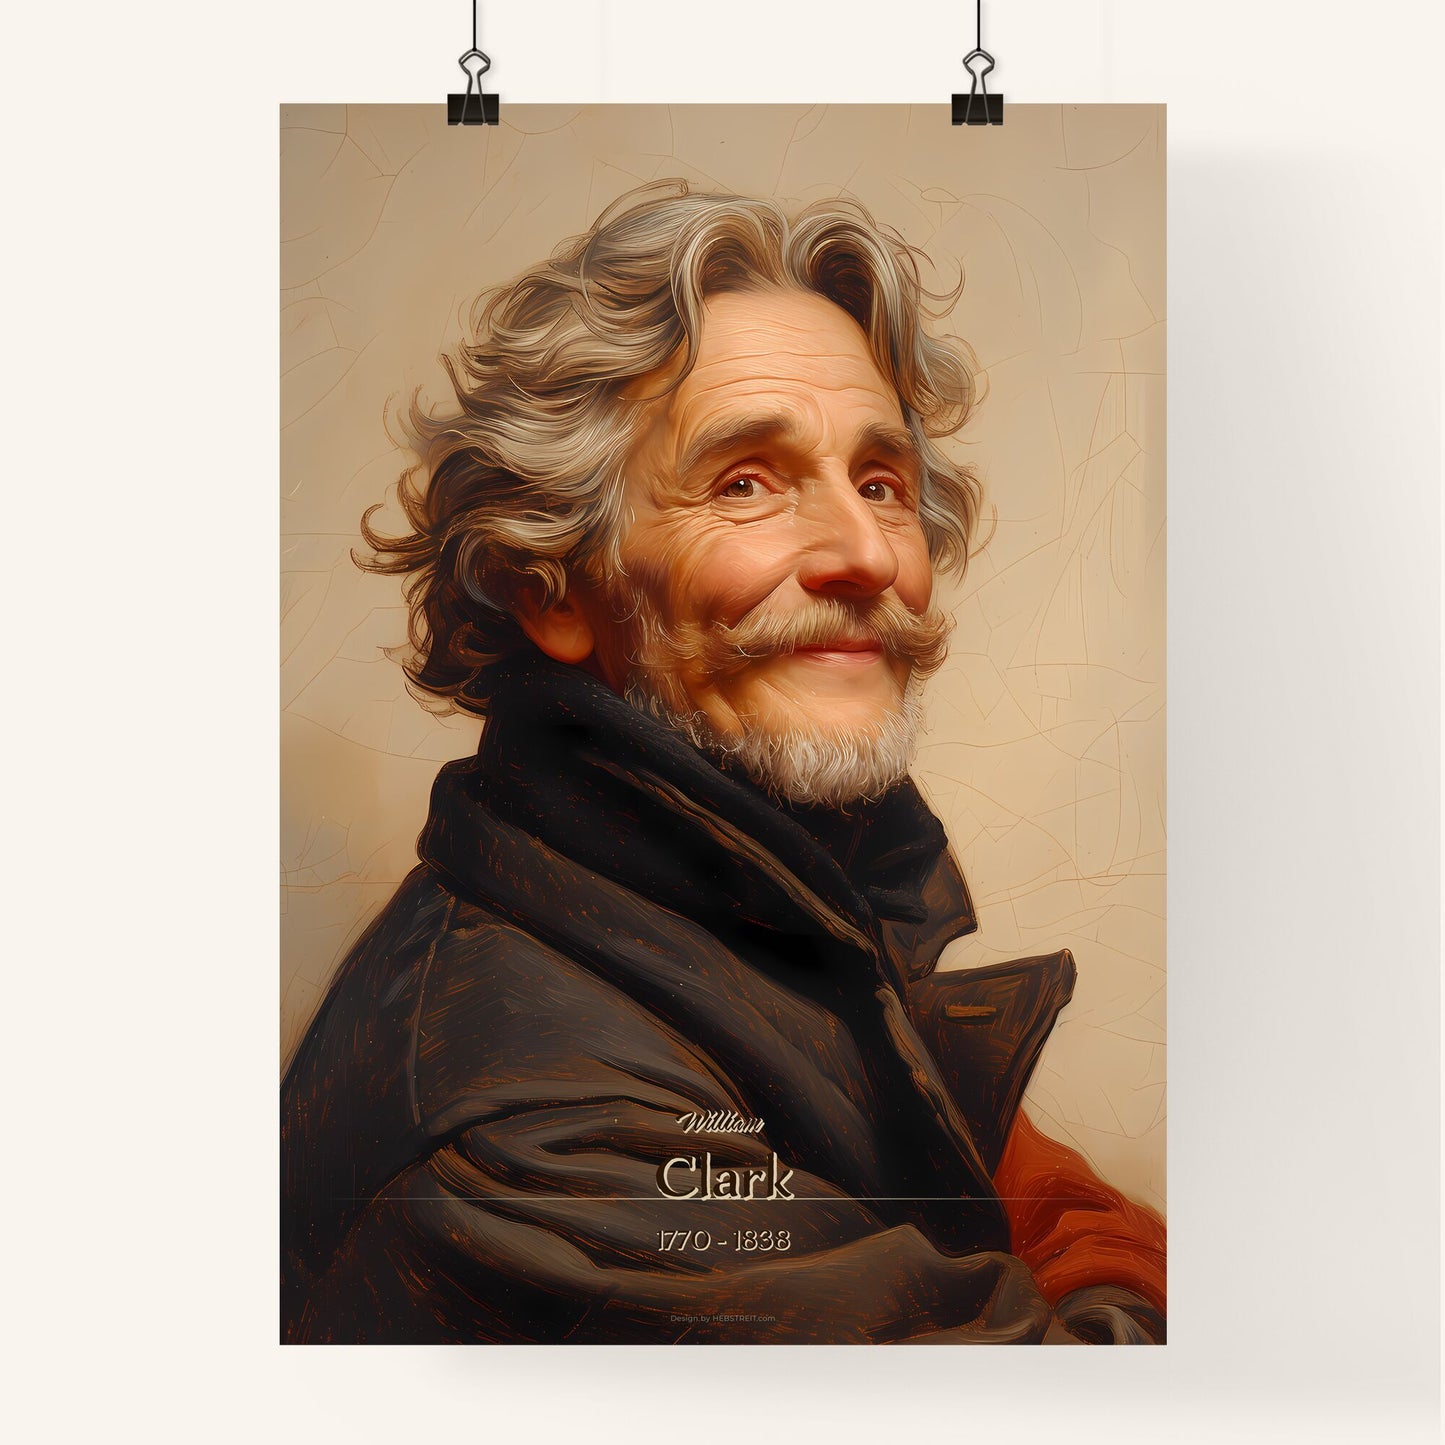 William, Clark, 1770 - 1838, A Poster of a man with a beard and mustache Default Title